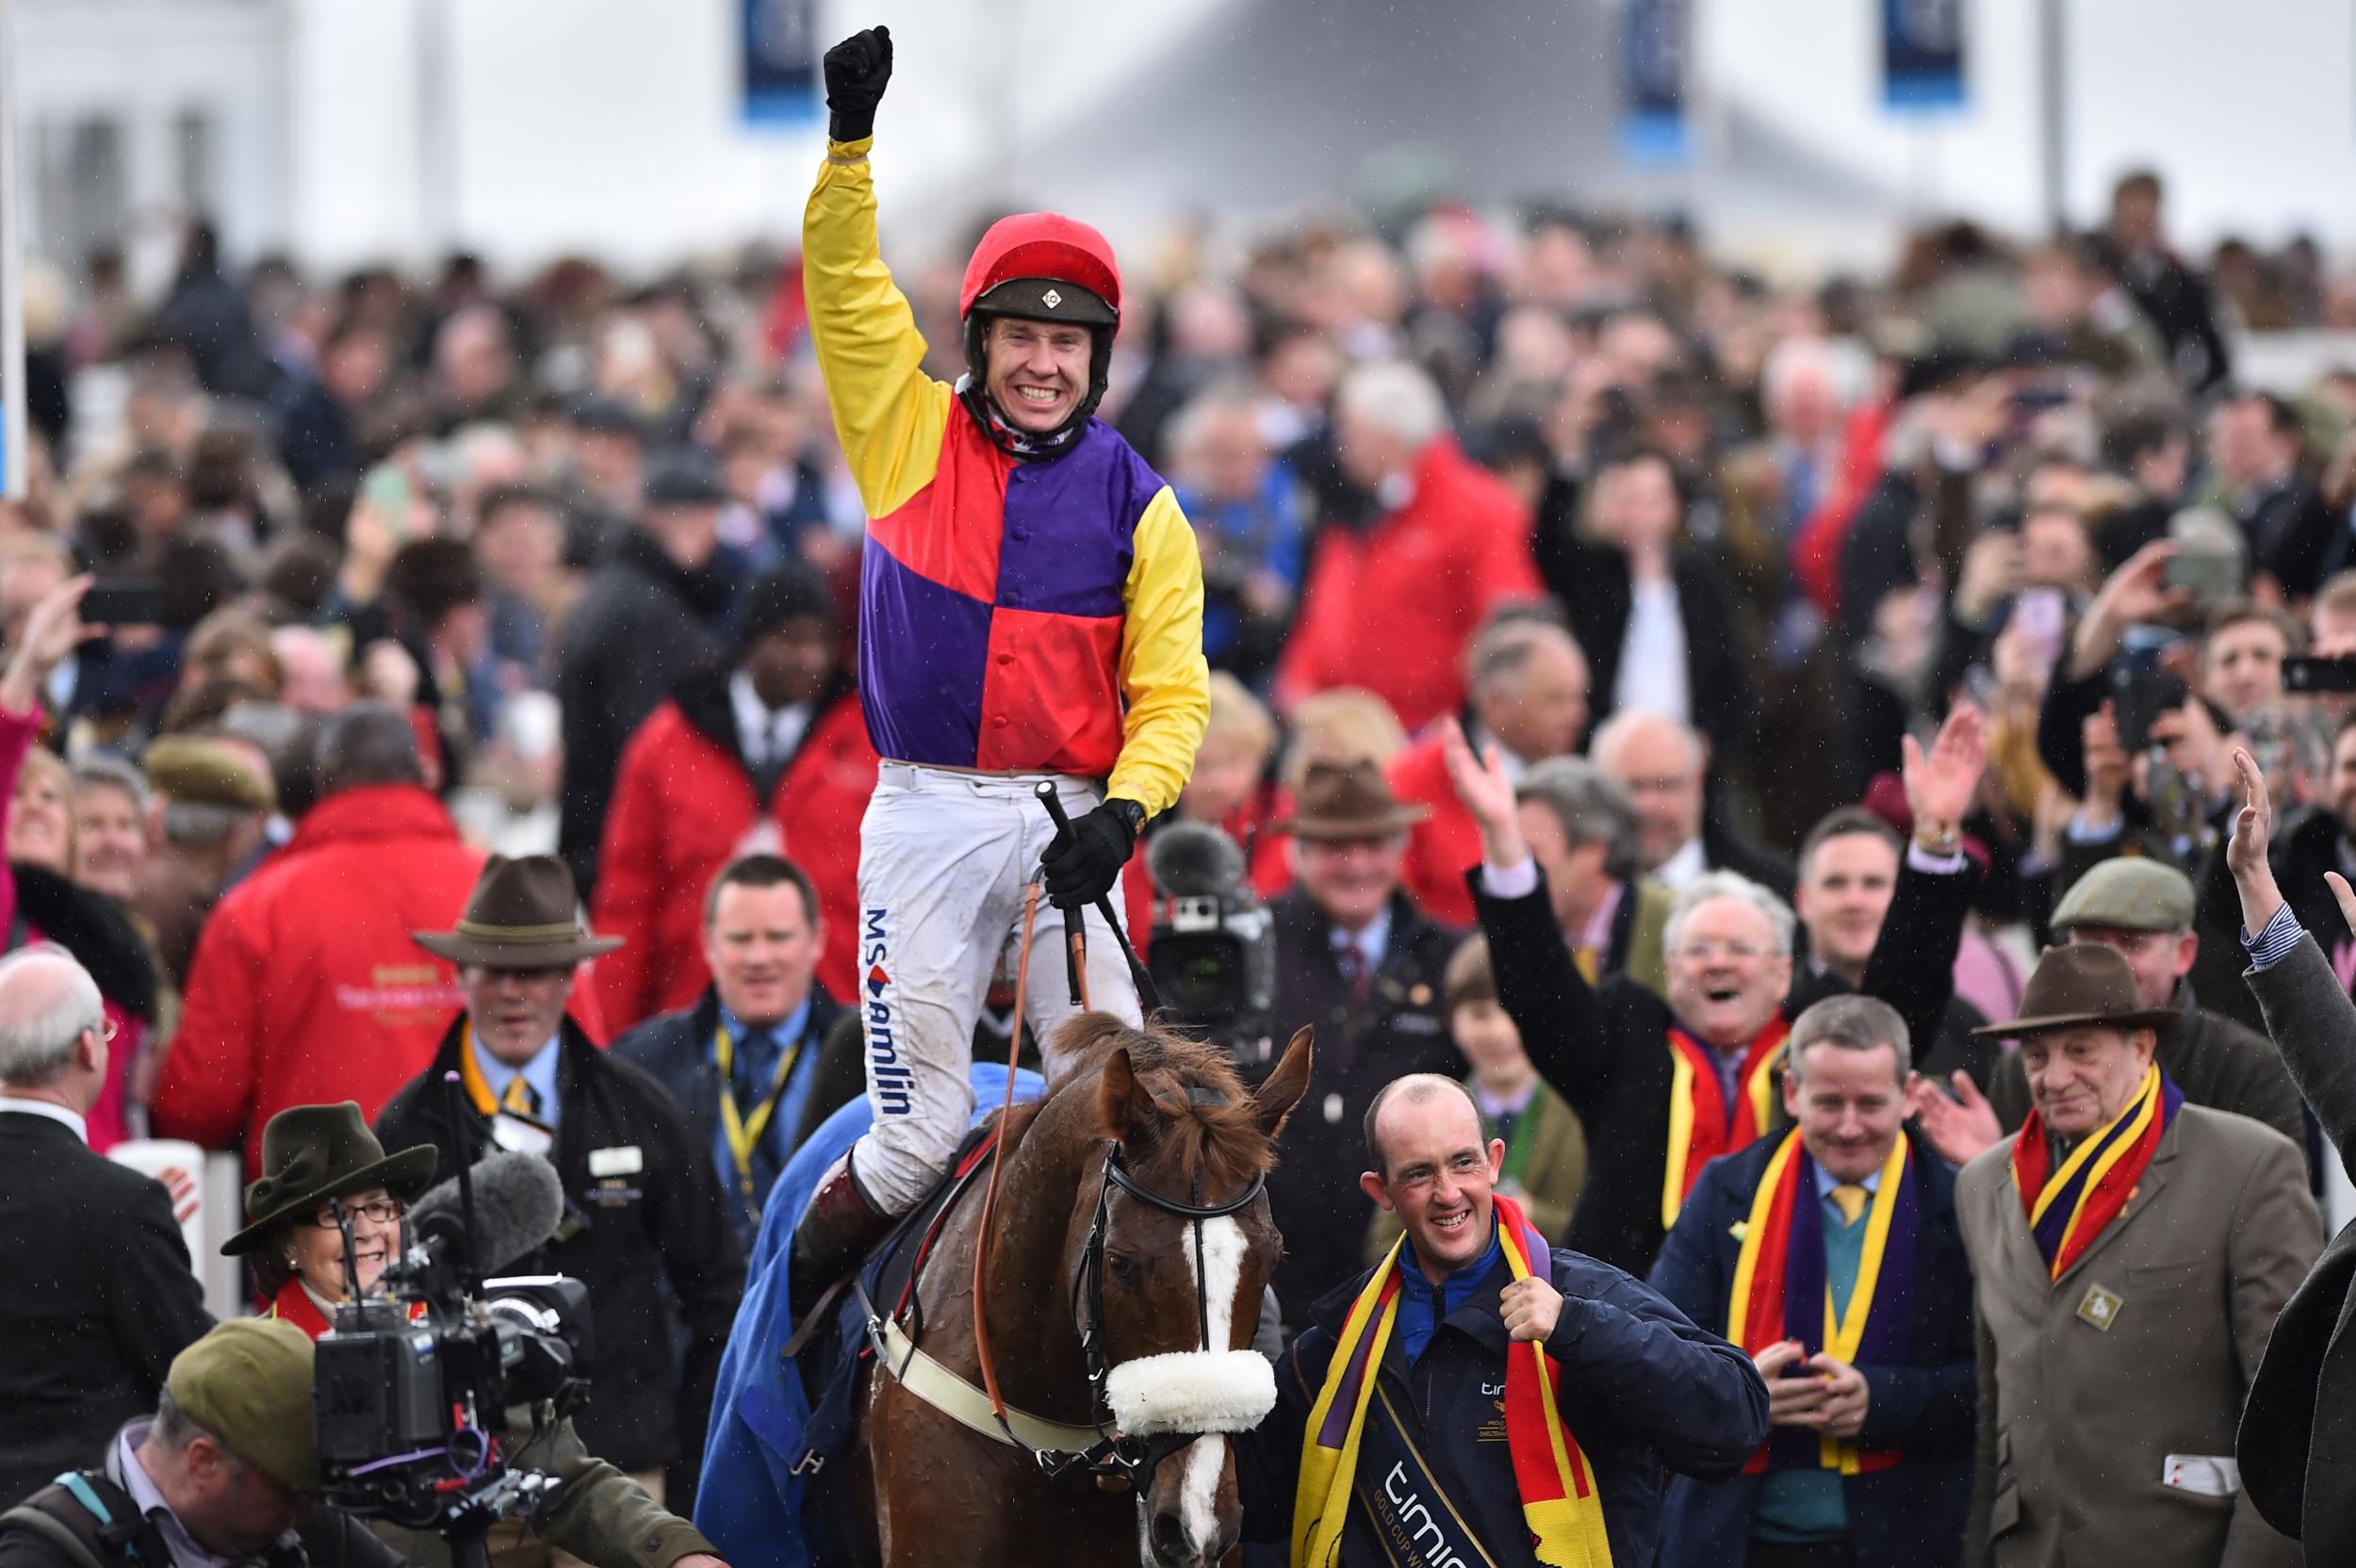 Native River is bidding to defend the Cheltenham Gold Cup